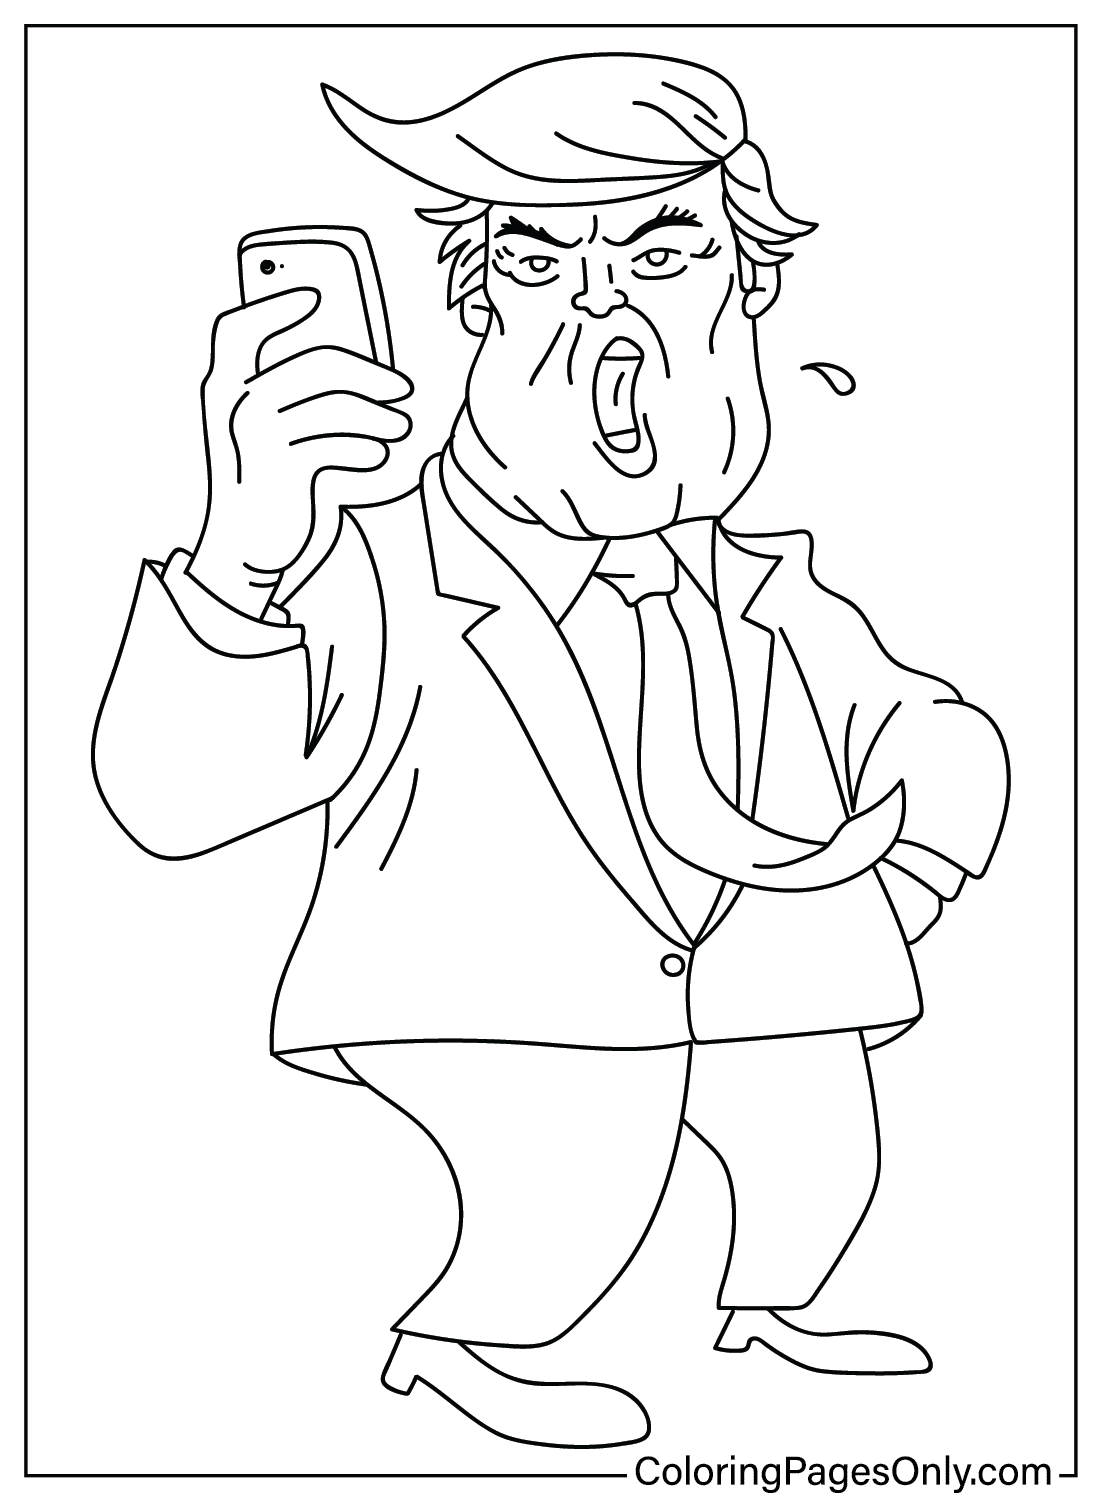 Funny Donald Trump Coloring Page